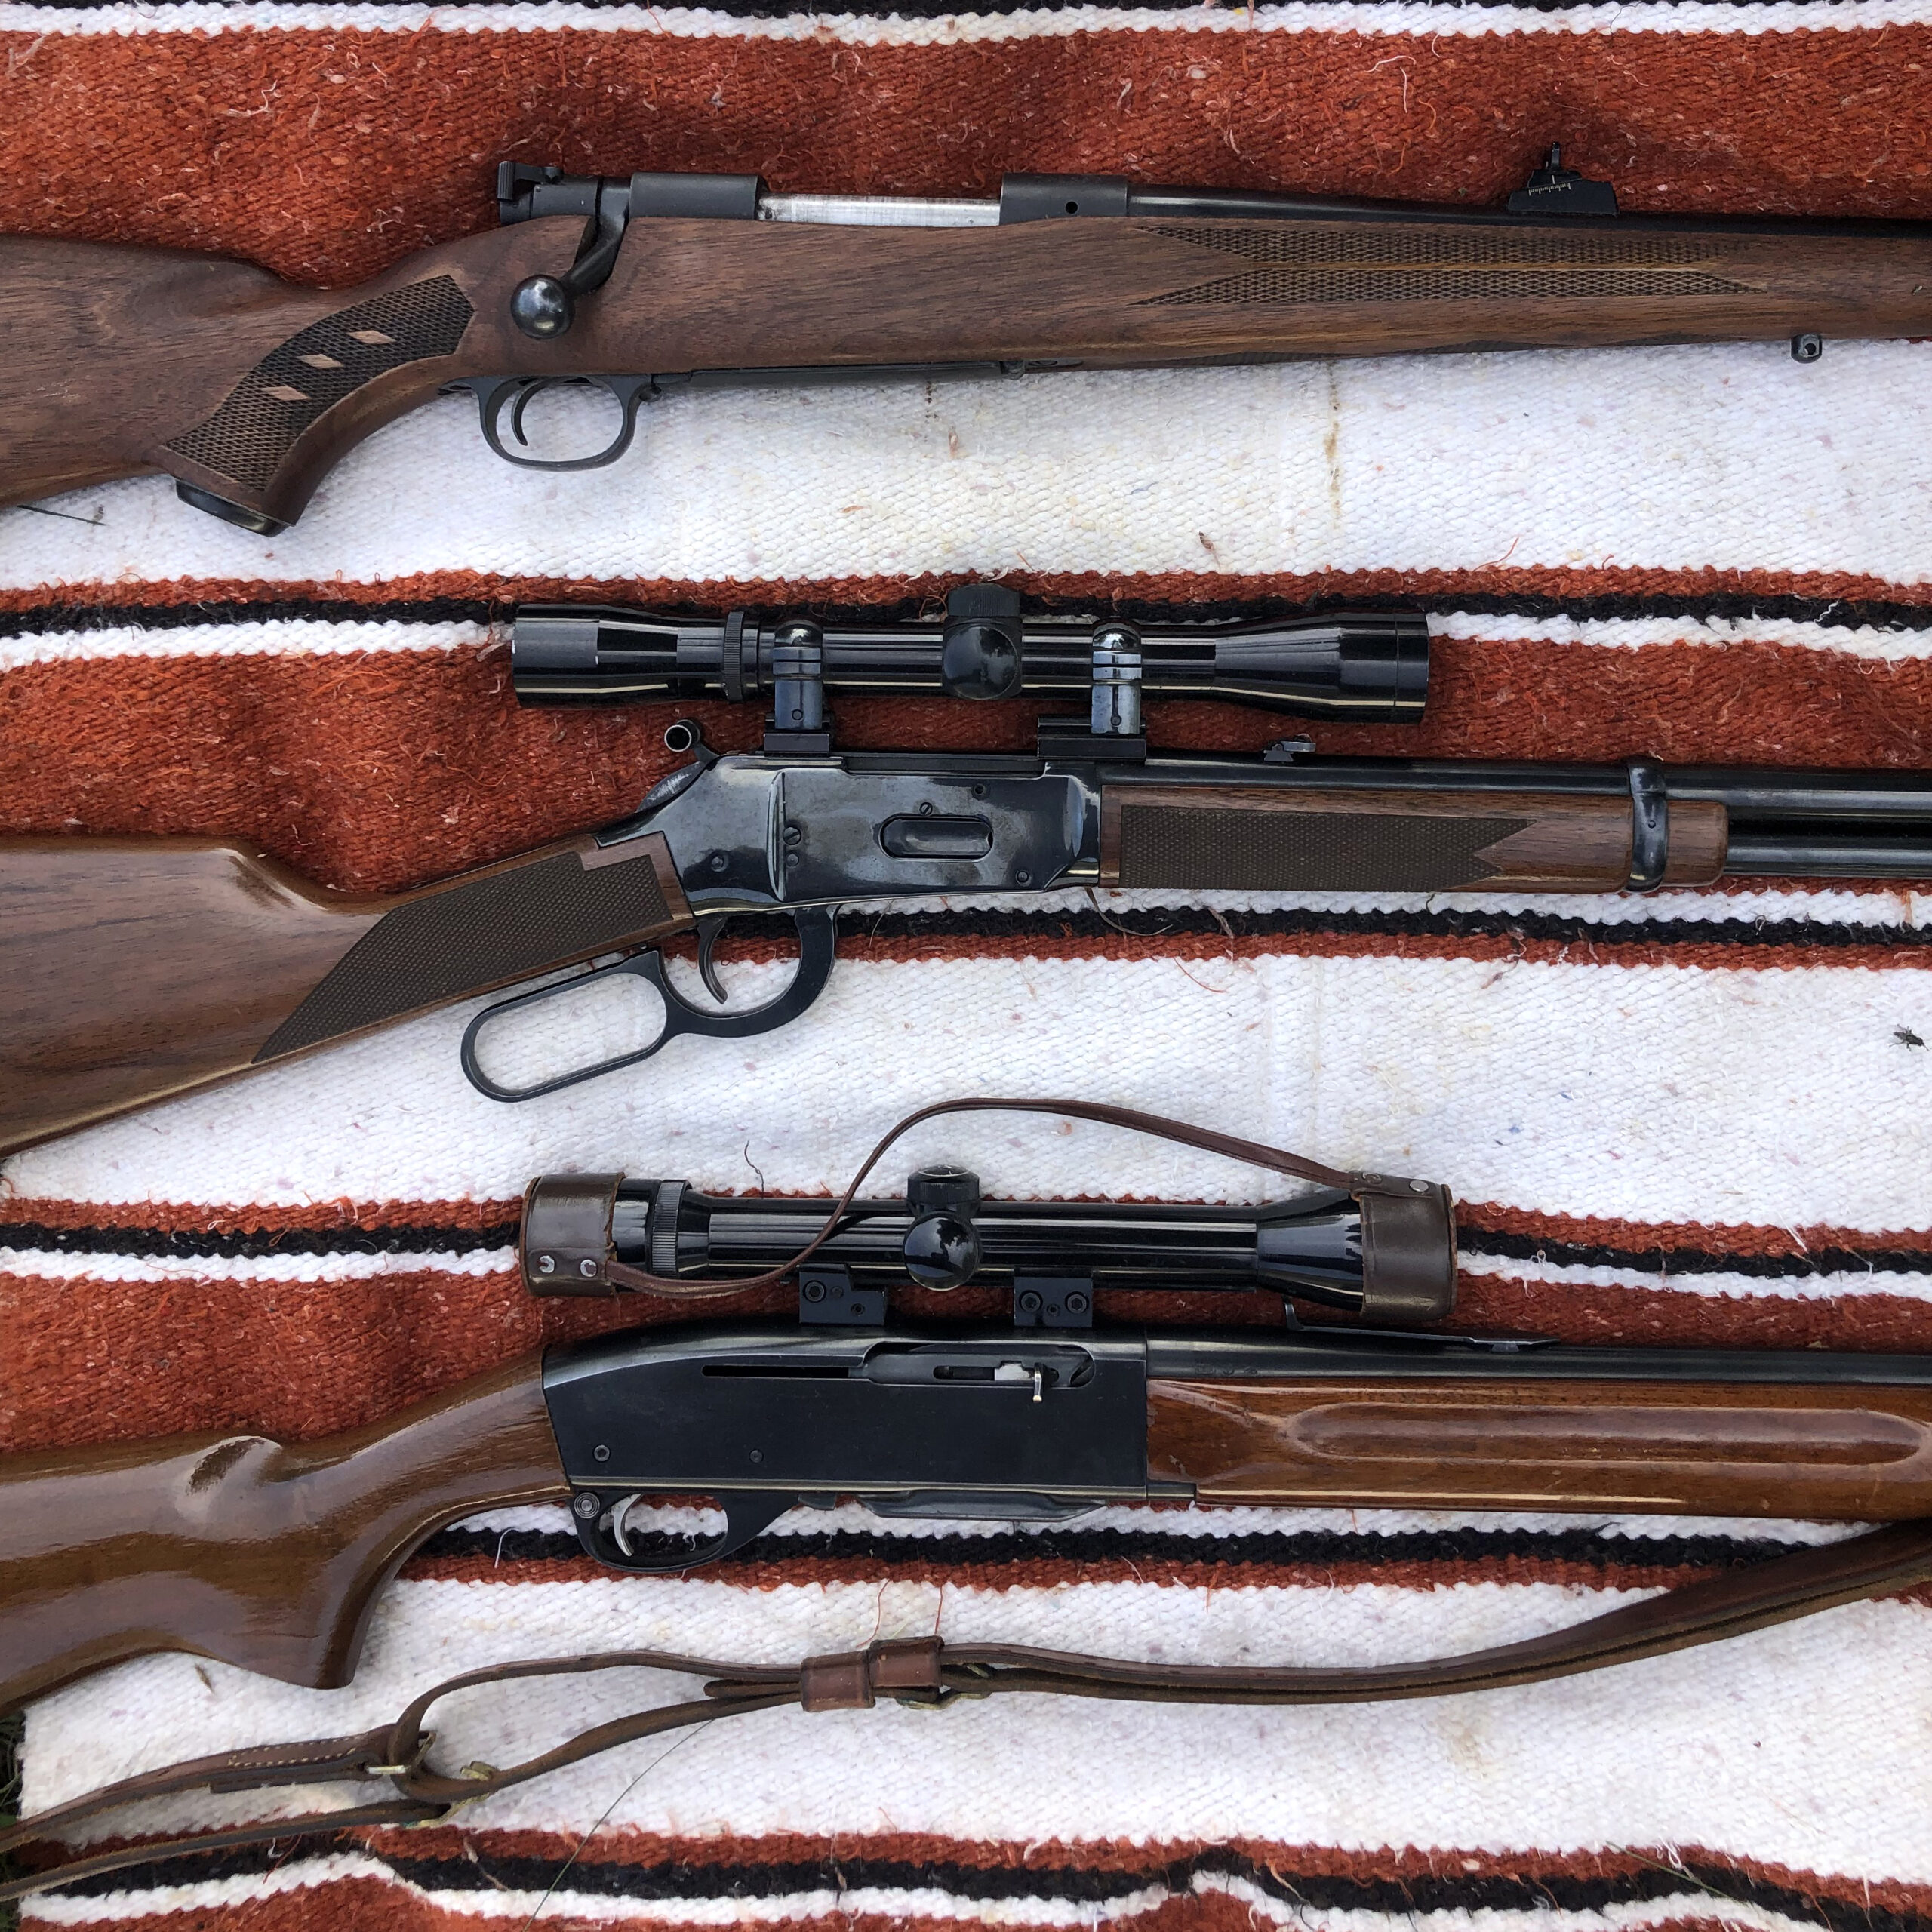 Three old rifles, two with scopes, on a woven red, white, and black blanket.